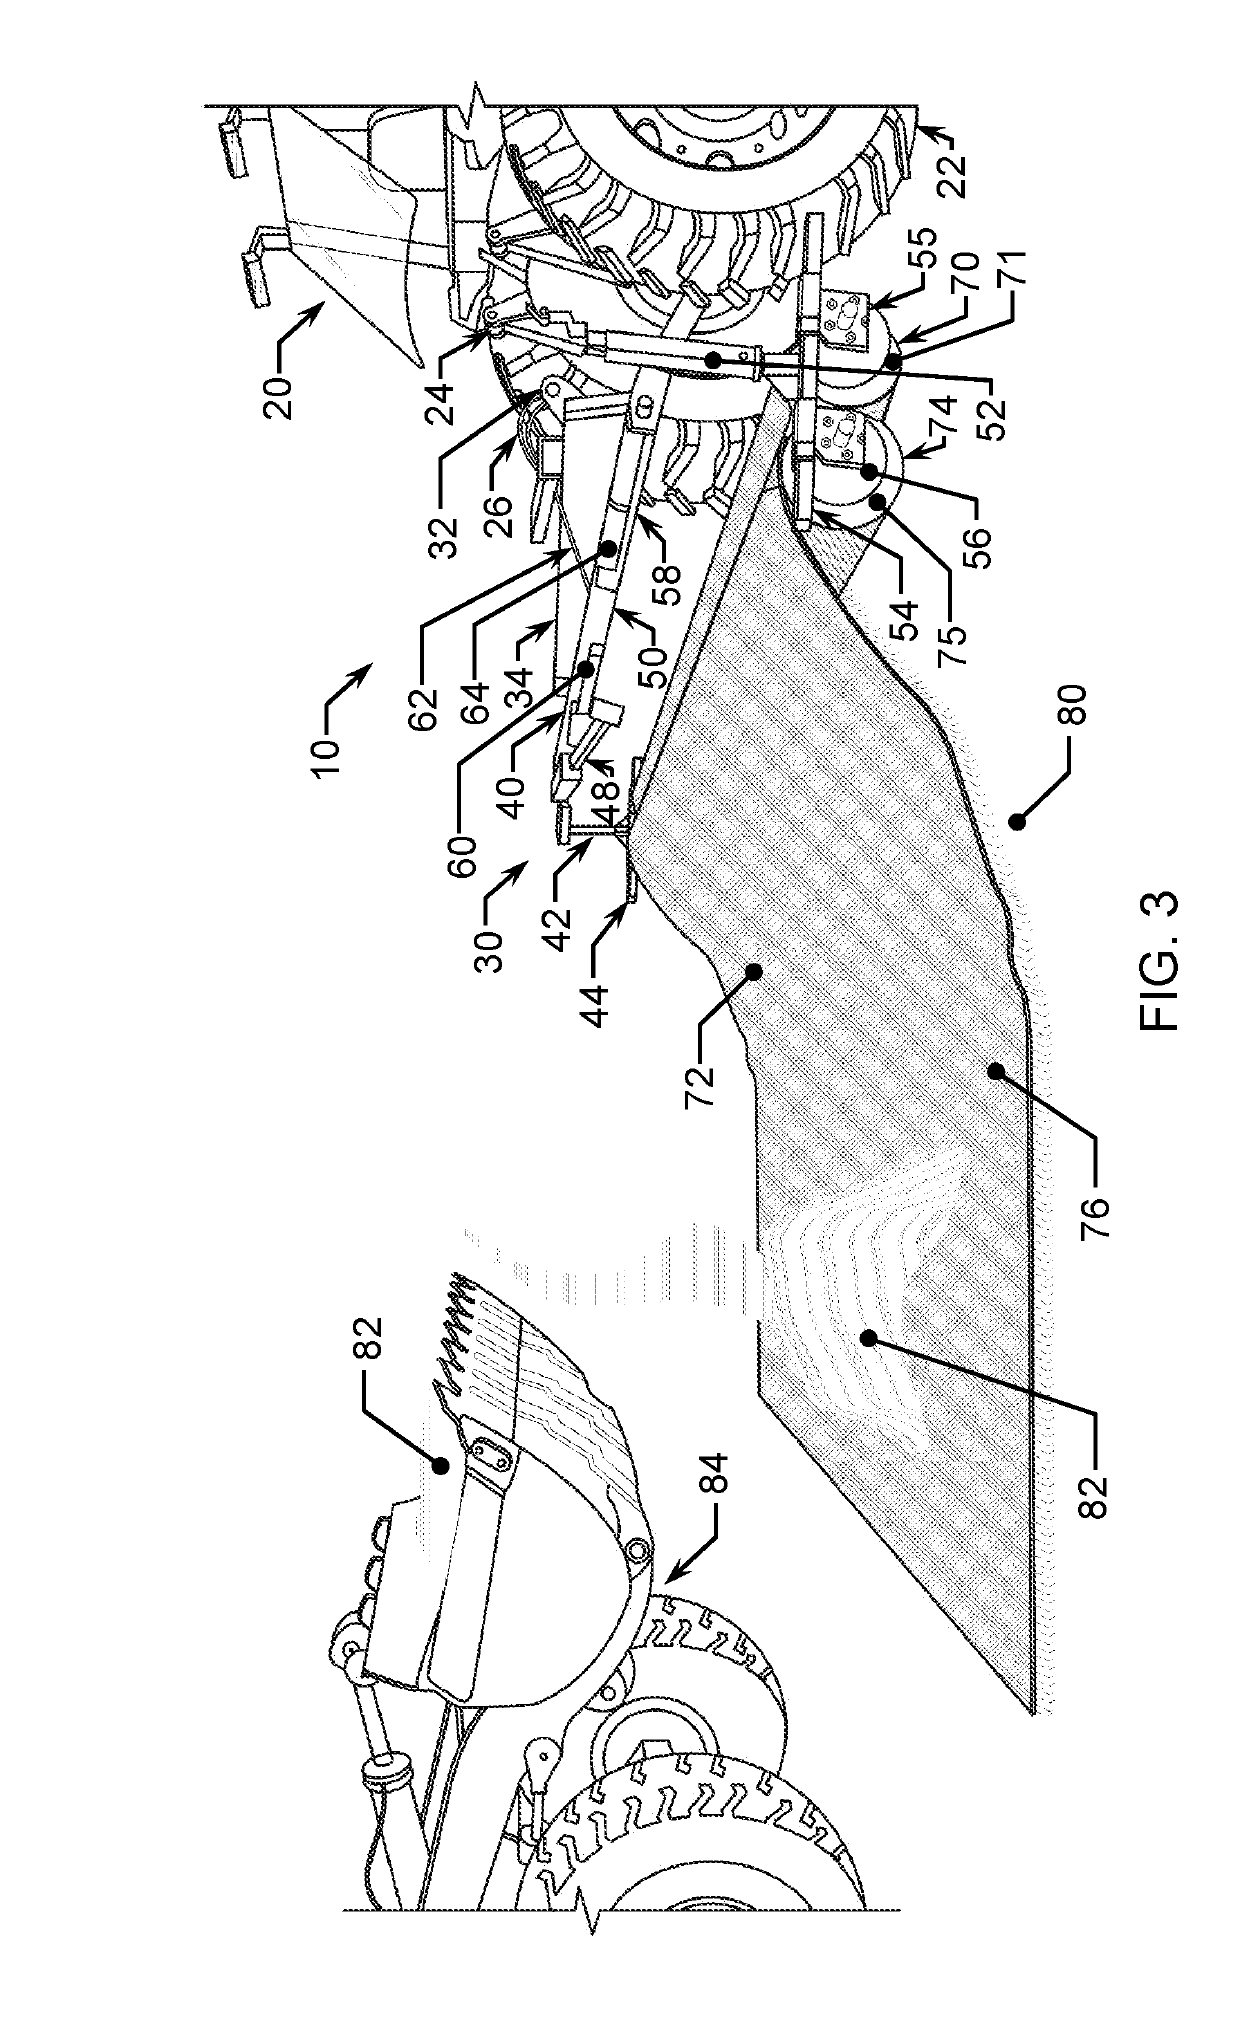 Textile dispensing apparatus and method of use